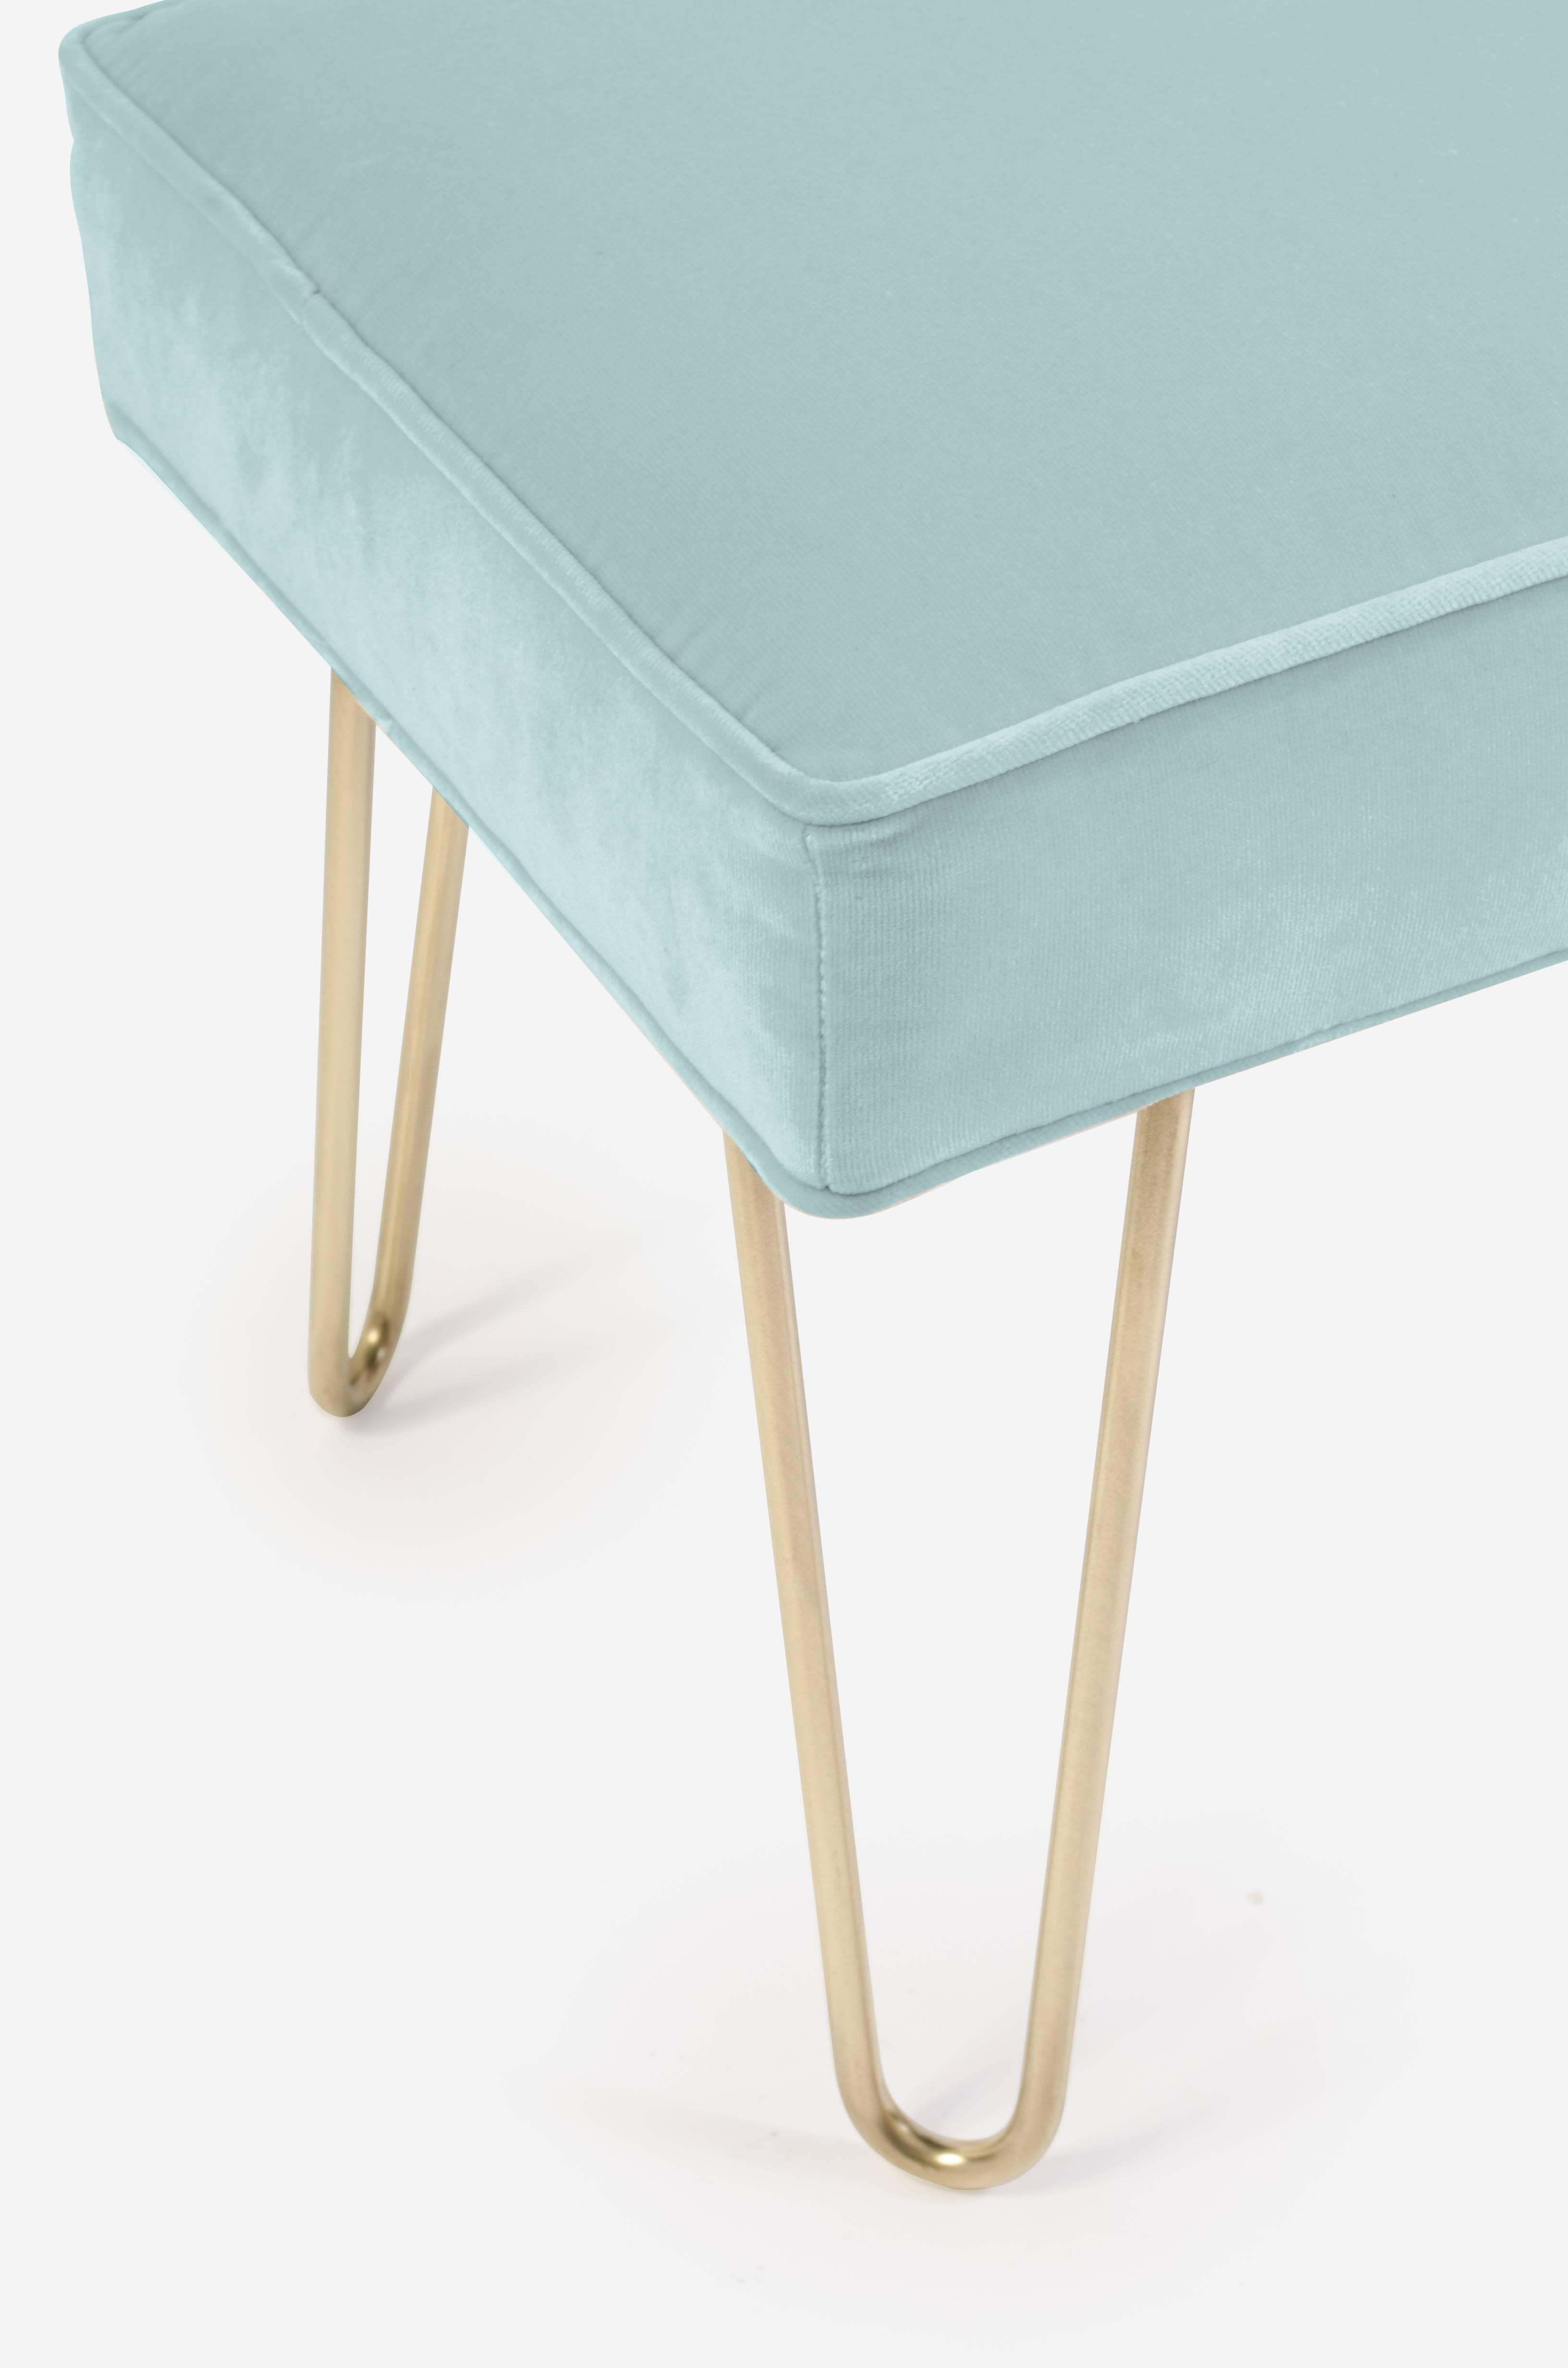 The perfect addition to any space! Wonderfully proportioned pair of ottomans upholstered in a supple mint velvet of the highest quality; 100% cotton. This work in a multitude of spaces: In a living space, under a console, at the foot of a bed. Think